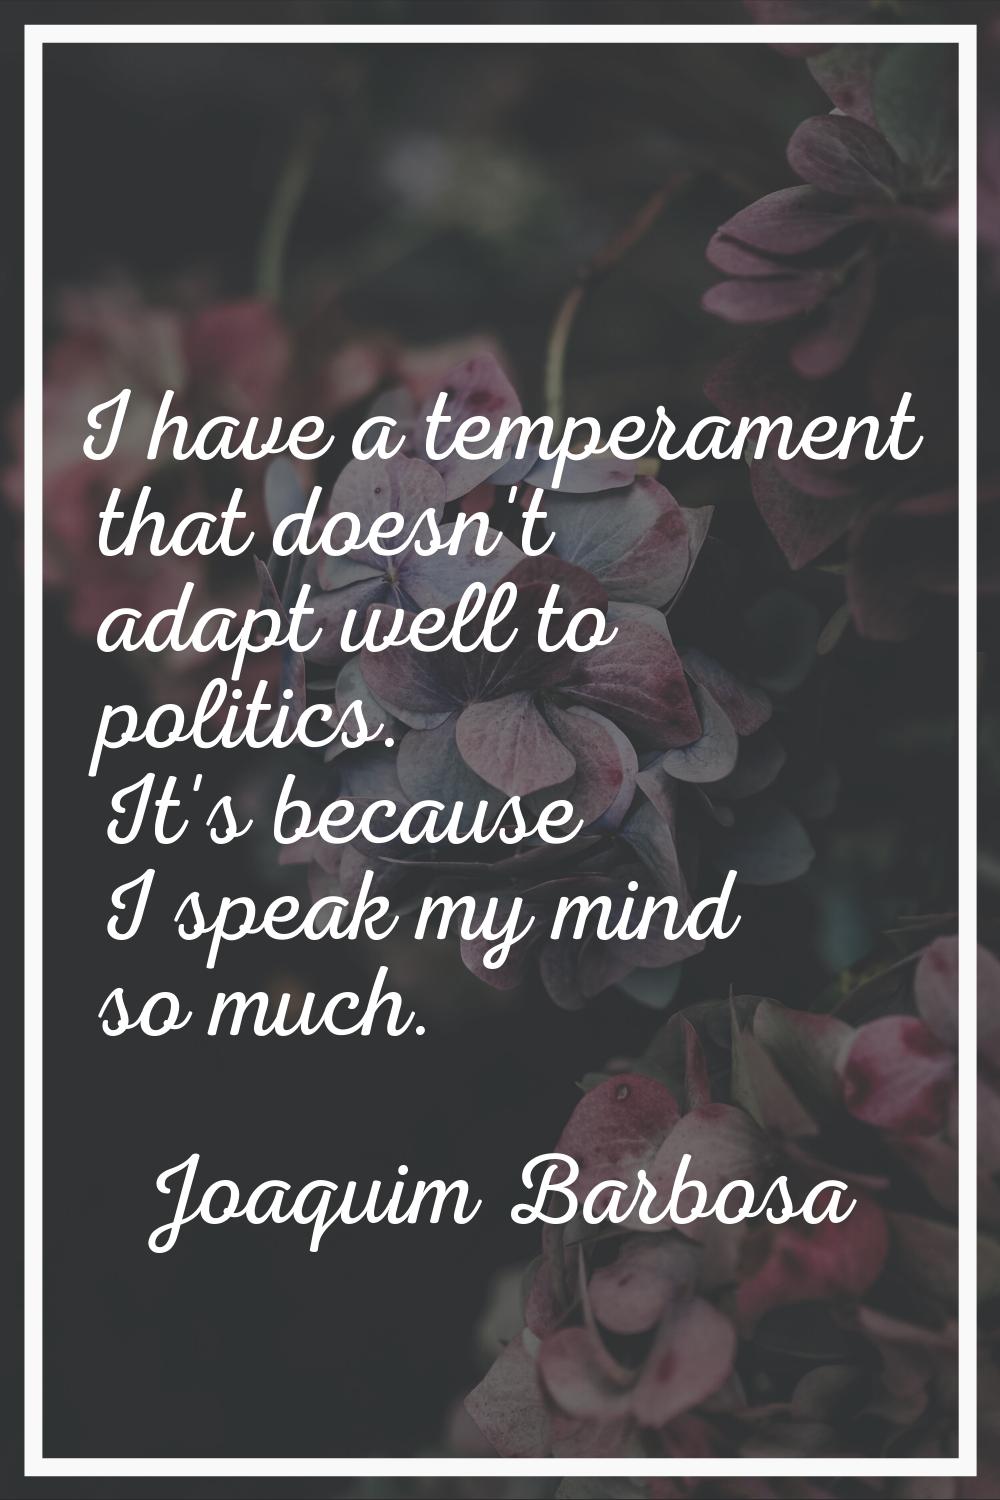 I have a temperament that doesn't adapt well to politics. It's because I speak my mind so much.